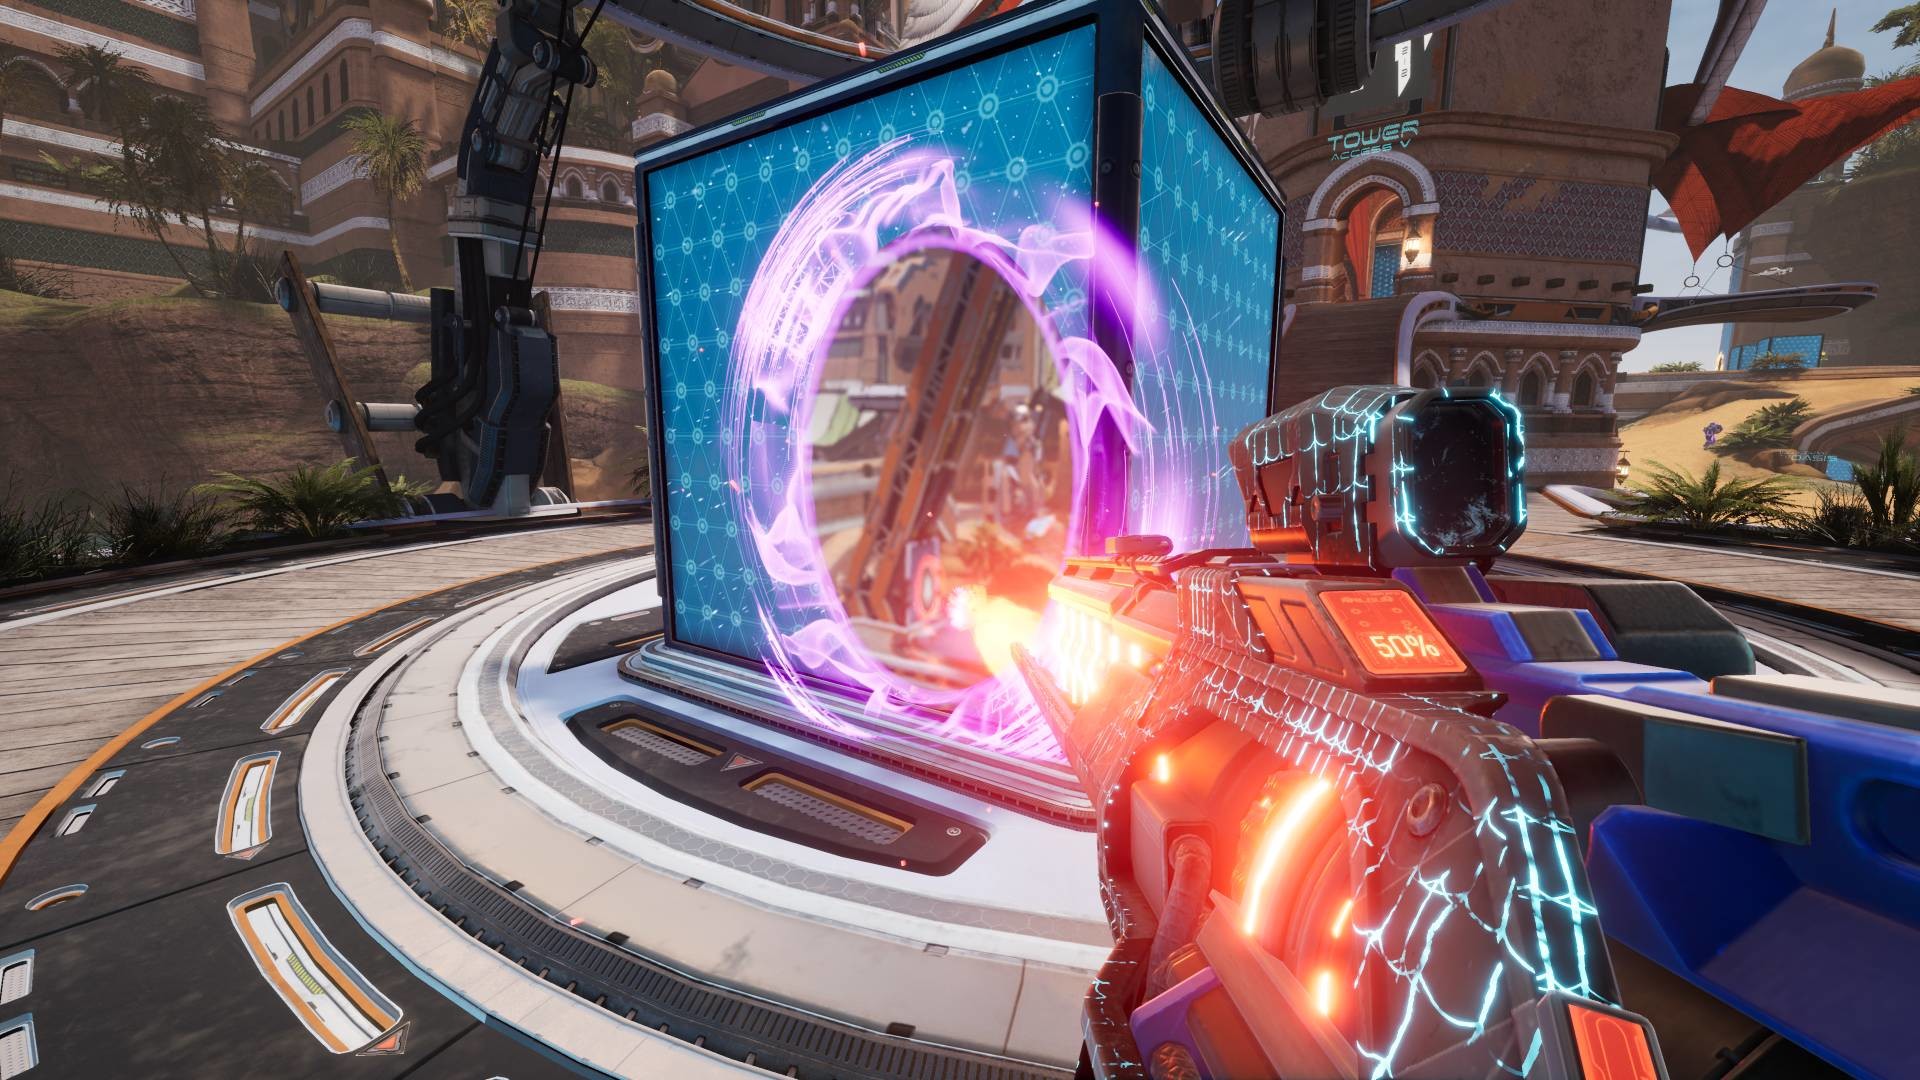 An unfastened  gross  connected  the broadside  of a container  successful  Splitgate, 1  of the champion  multiplayer games